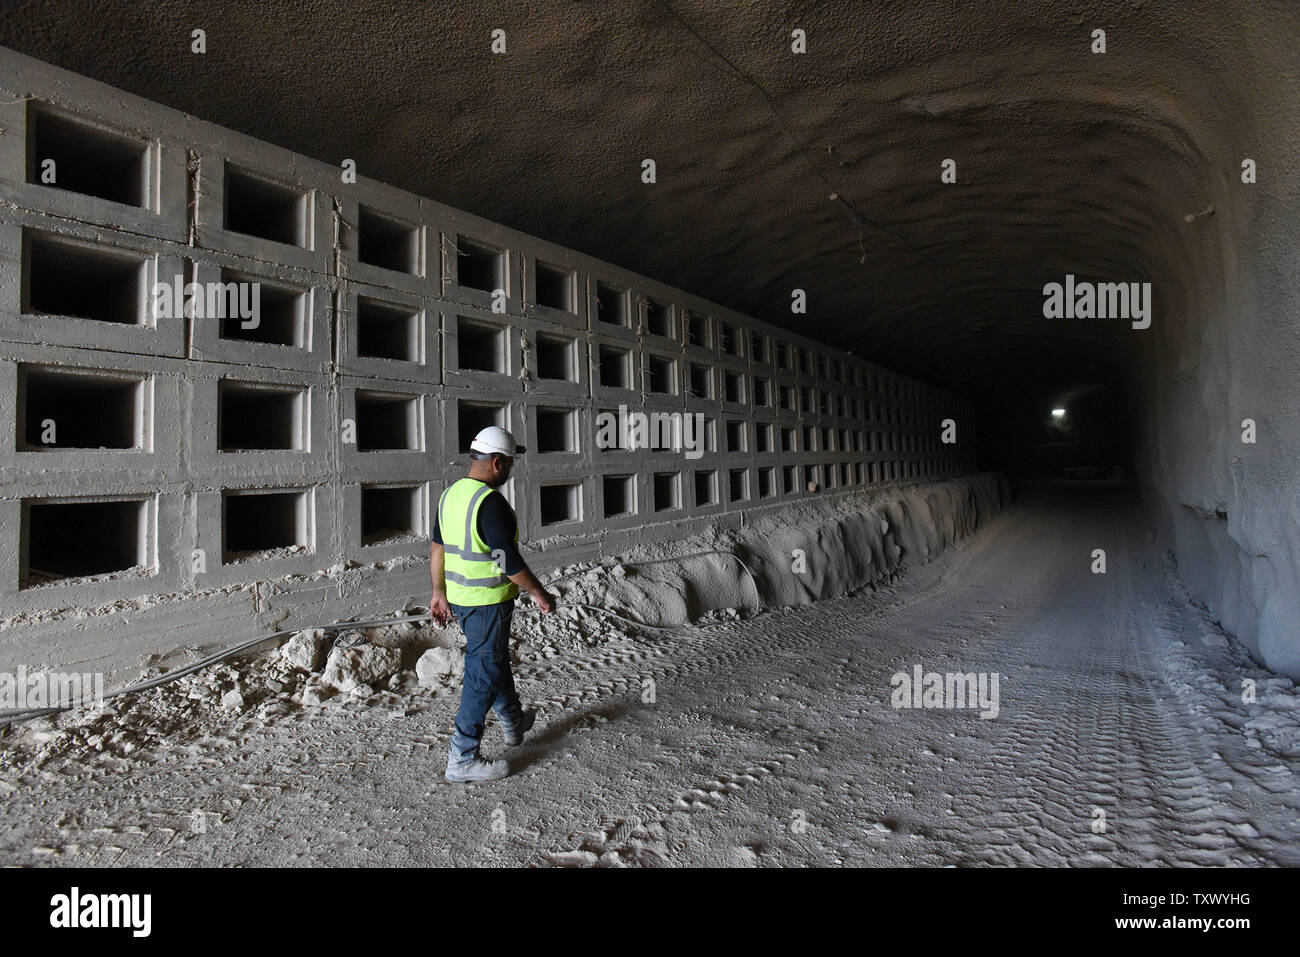 Itzik Behar, project engineer, walks past partially constructed  burial plots in the underground burial tunnels at the Givat Shaul Cemetery, Har HaMenuchot, in Jerusalem, Israel, November 26, 2017.  Due to overcrowding and lack of land for burial sites in Jerusalem, the religious burial society called Chevra Kadisha, is building the massive underground burial site that will provide space for more than 22,000 graves.   Photo by Debbie Hill/UPI Stock Photo